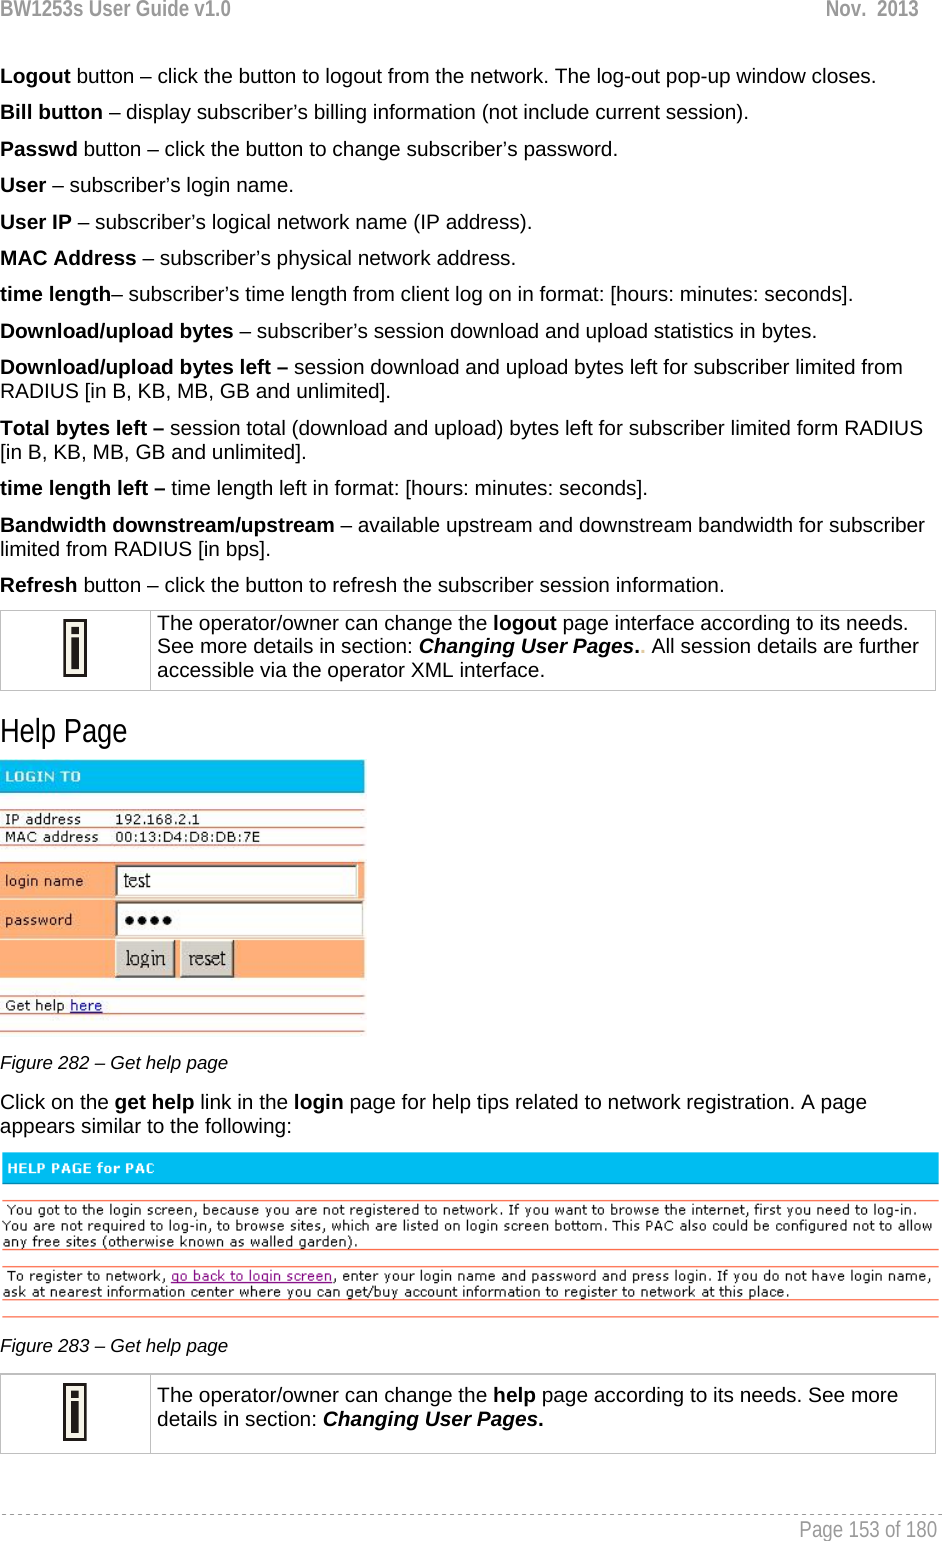 BW1253s User Guide v1.0  Nov.  2013     Page 153 of 180   Logout button – click the button to logout from the network. The log-out pop-up window closes. Bill button – display subscriber’s billing information (not include current session). Passwd button – click the button to change subscriber’s password. User – subscriber’s login name. User IP – subscriber’s logical network name (IP address). MAC Address – subscriber’s physical network address. time length– subscriber’s time length from client log on in format: [hours: minutes: seconds]. Download/upload bytes – subscriber’s session download and upload statistics in bytes. Download/upload bytes left – session download and upload bytes left for subscriber limited from RADIUS [in B, KB, MB, GB and unlimited]. Total bytes left – session total (download and upload) bytes left for subscriber limited form RADIUS [in B, KB, MB, GB and unlimited]. time length left – time length left in format: [hours: minutes: seconds]. Bandwidth downstream/upstream – available upstream and downstream bandwidth for subscriber limited from RADIUS [in bps]. Refresh button – click the button to refresh the subscriber session information.  The operator/owner can change the logout page interface according to its needs. See more details in section: Changing User Pages.. All session details are further accessible via the operator XML interface. Help Page  Figure 282 – Get help page Click on the get help link in the login page for help tips related to network registration. A page appears similar to the following:  Figure 283 – Get help page  The operator/owner can change the help page according to its needs. See more details in section: Changing User Pages.  